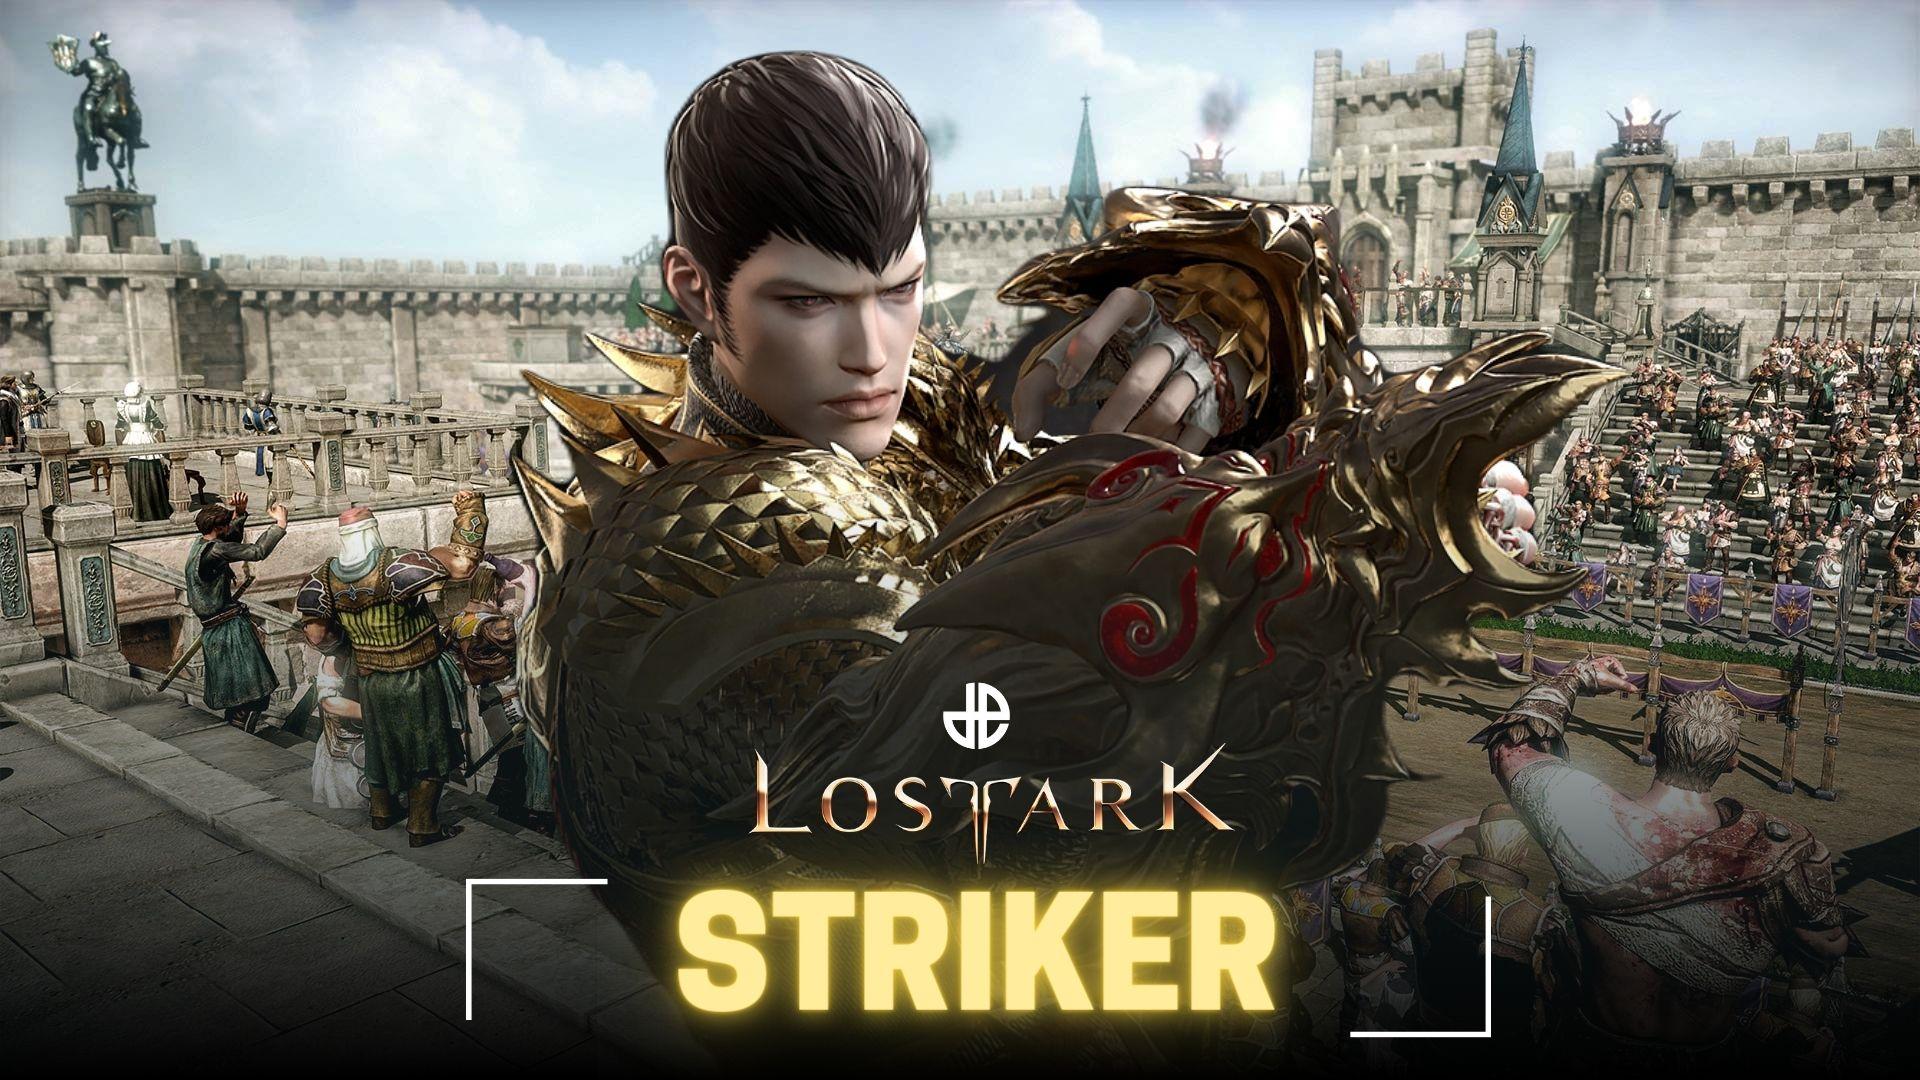 Lost Ark Striker Guide: How To Build A Striker - Fextralife